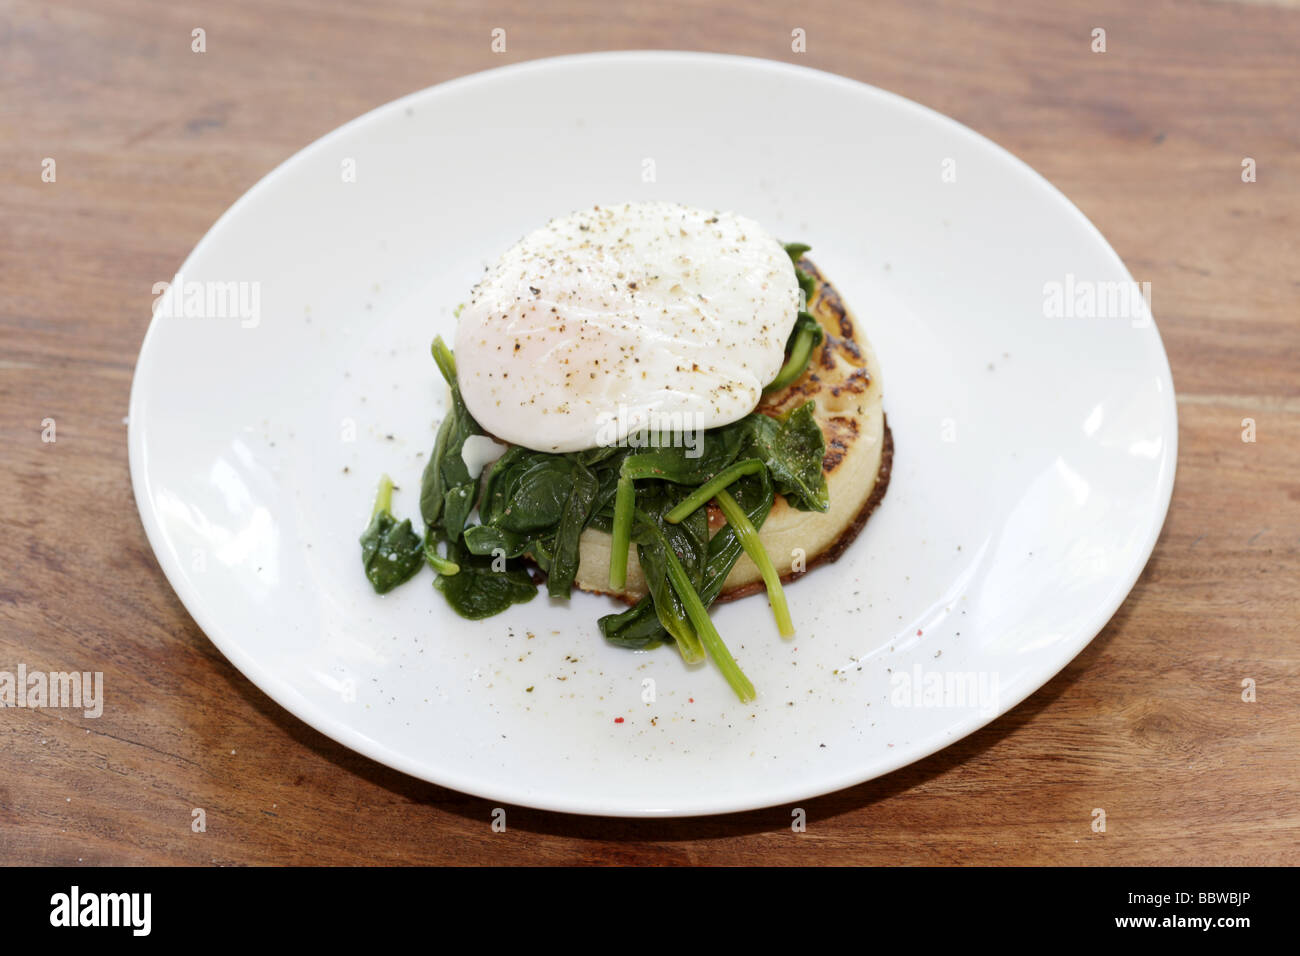 Poached Egg and Spinach Muffin Stock Photo